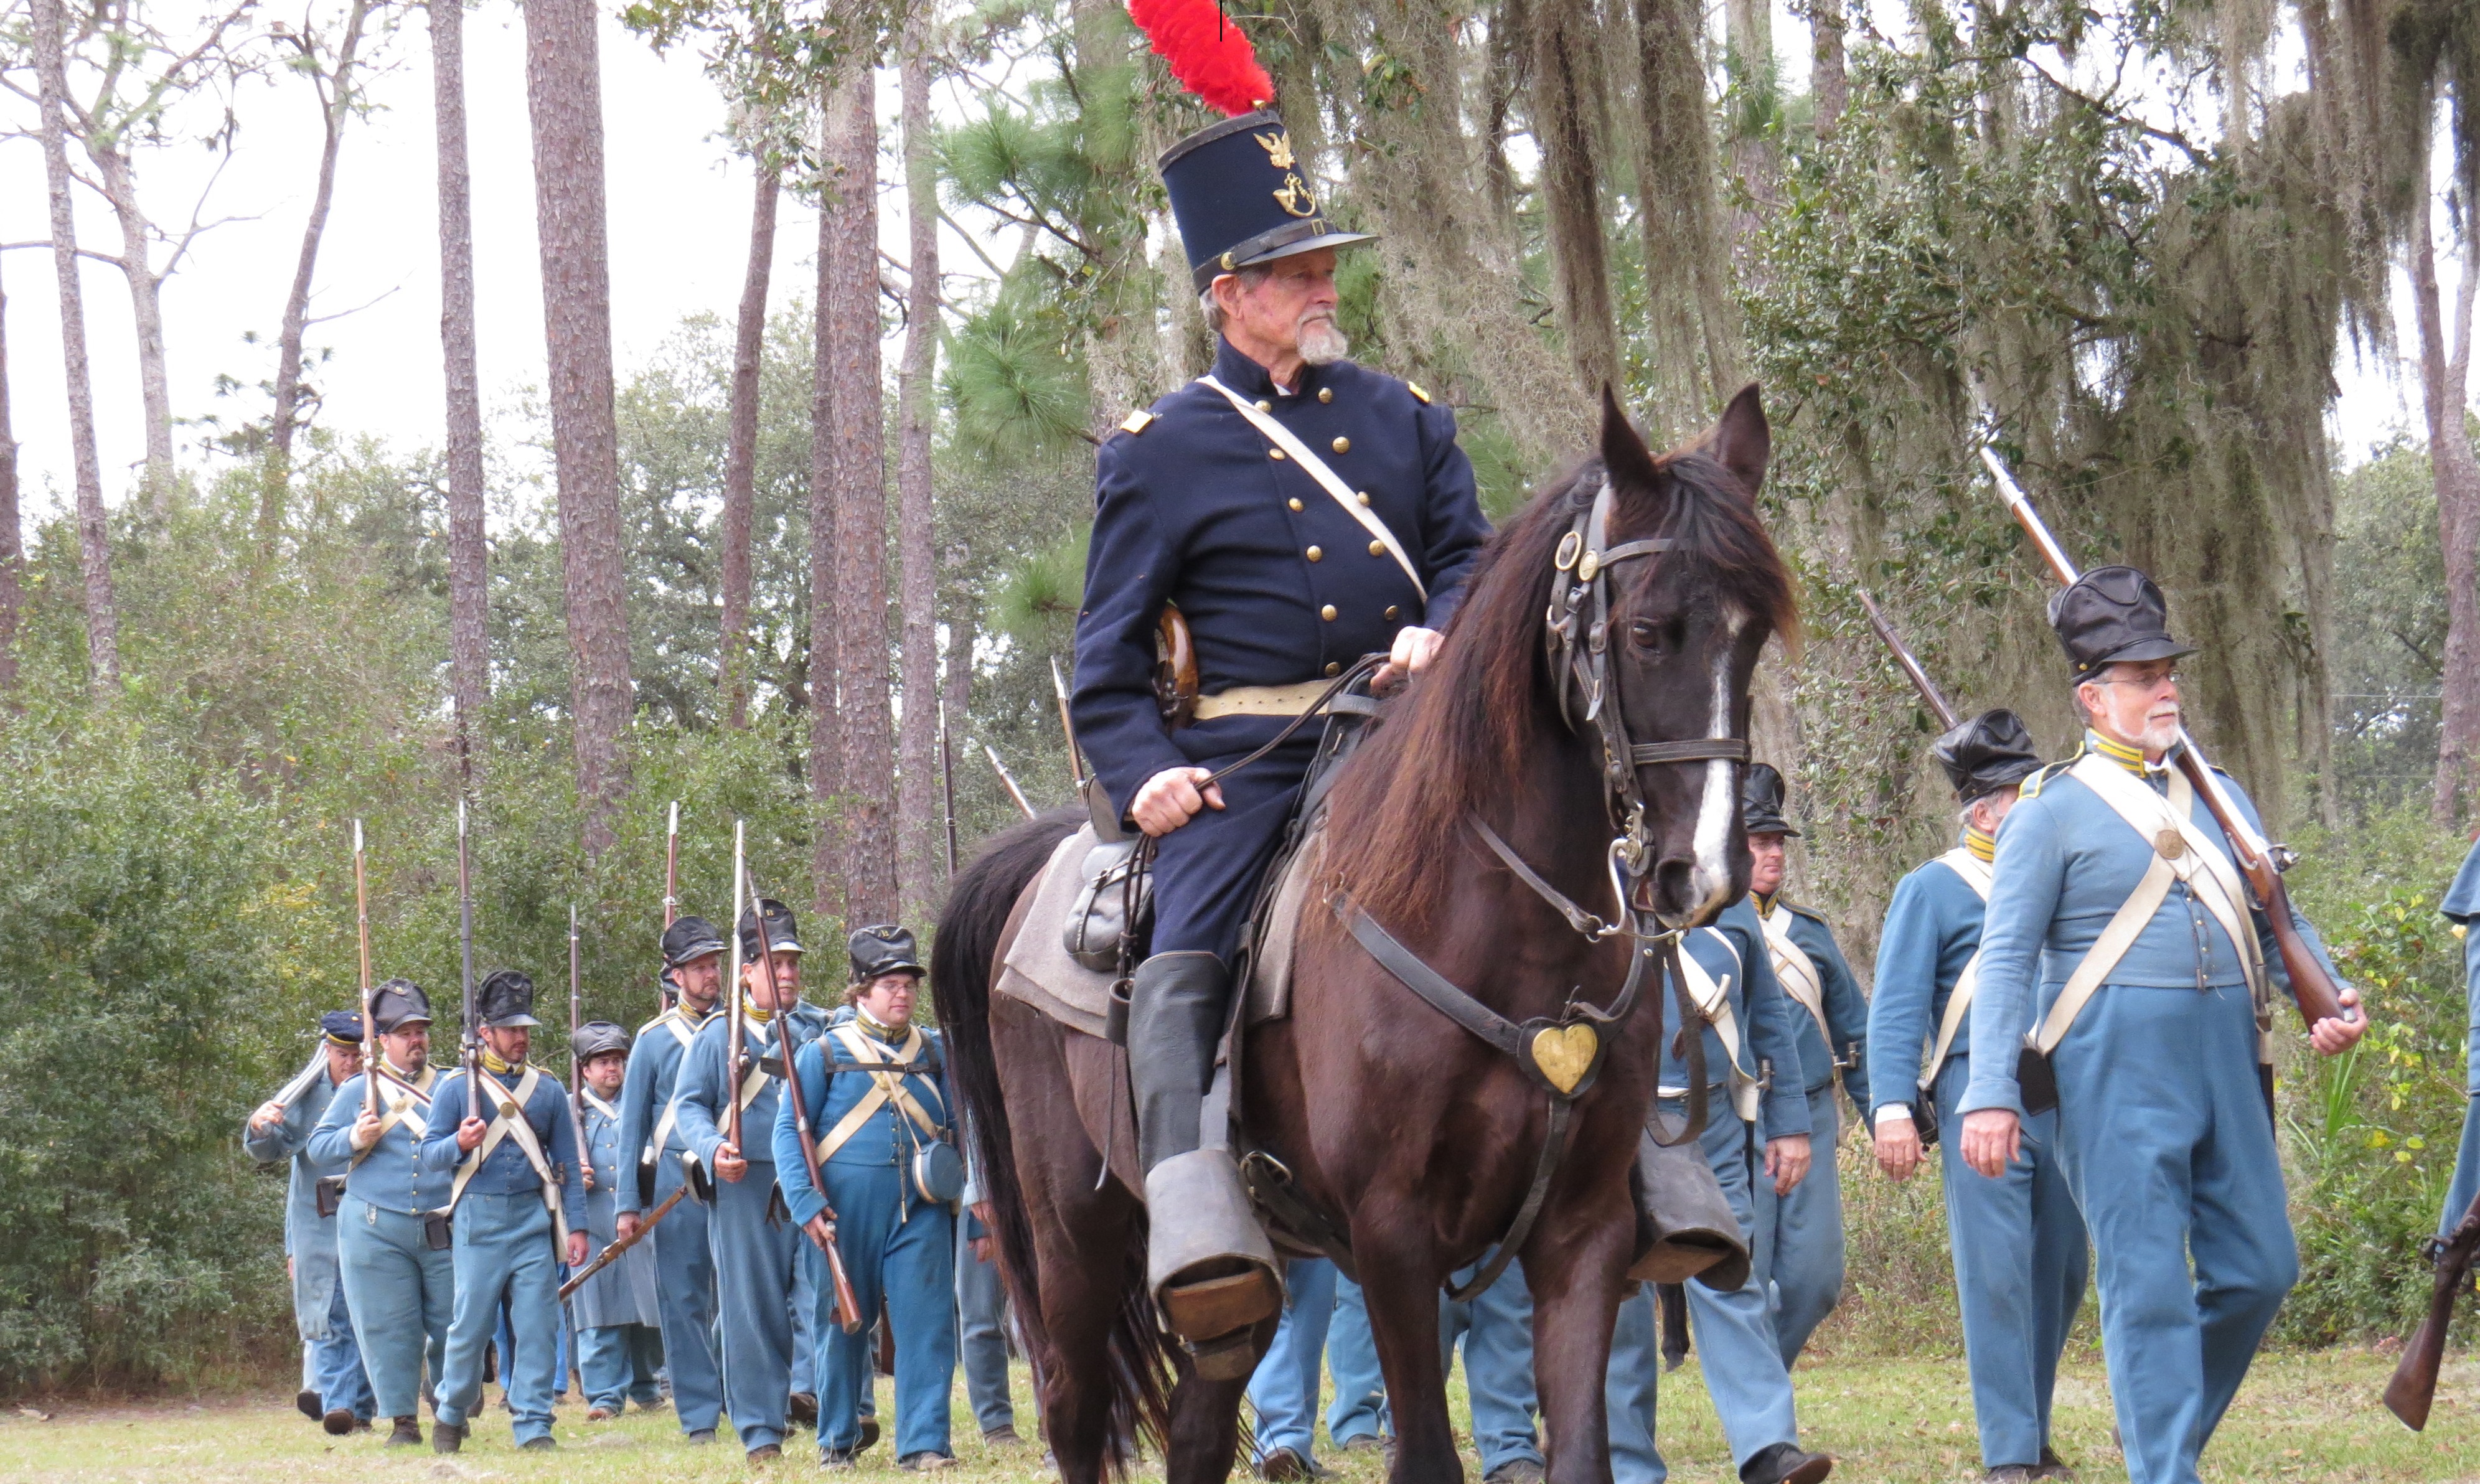 Major Dade leads the troops at Dade Battlefield